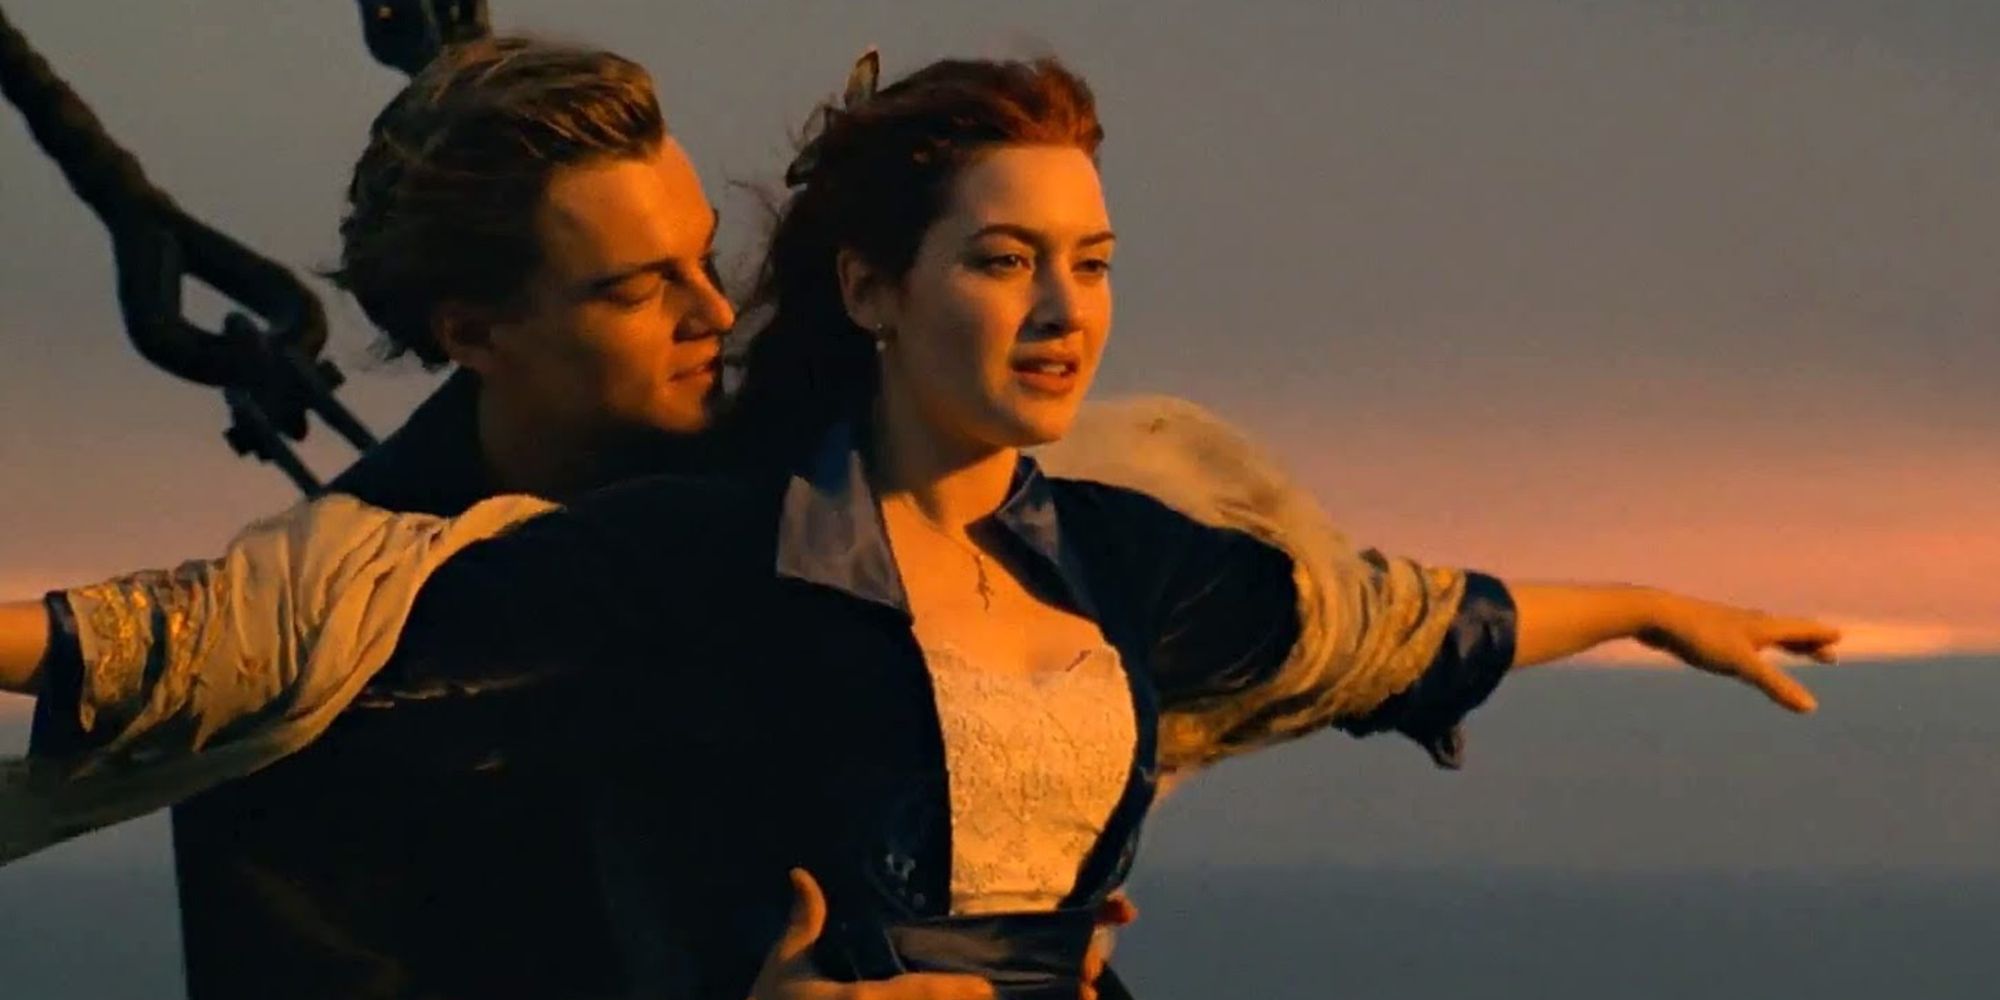 Jack hugging Rose from behind while her arms are outstretched at the front of the boat